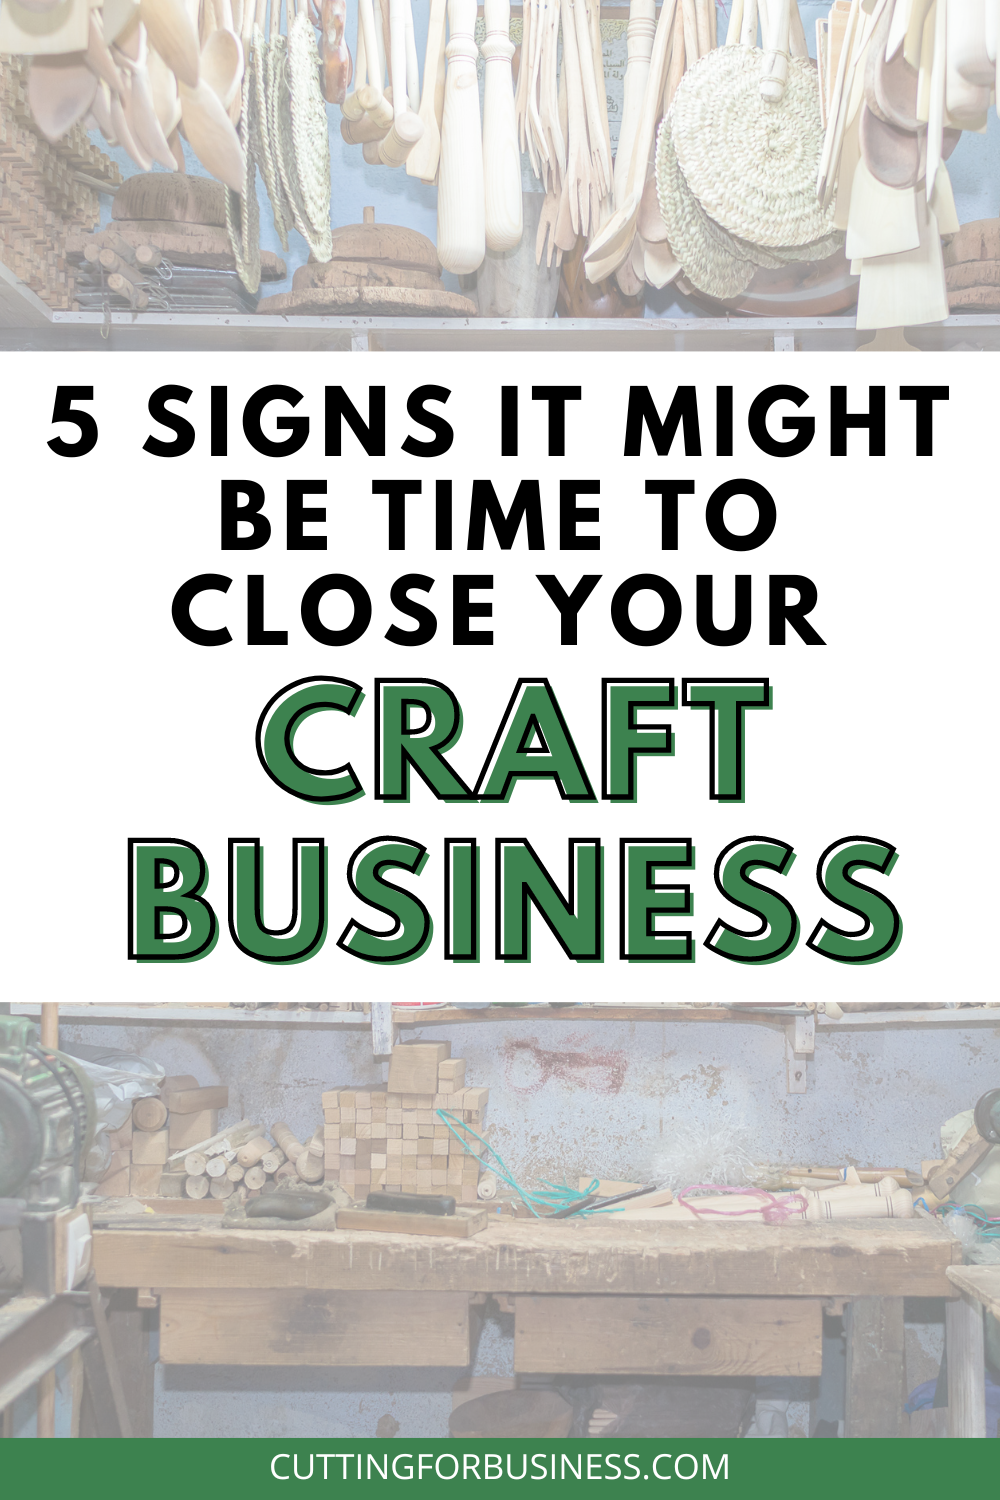 5 Signs That it Might Be Time to Close Your Craft Business - cuttingforbusiness.com.